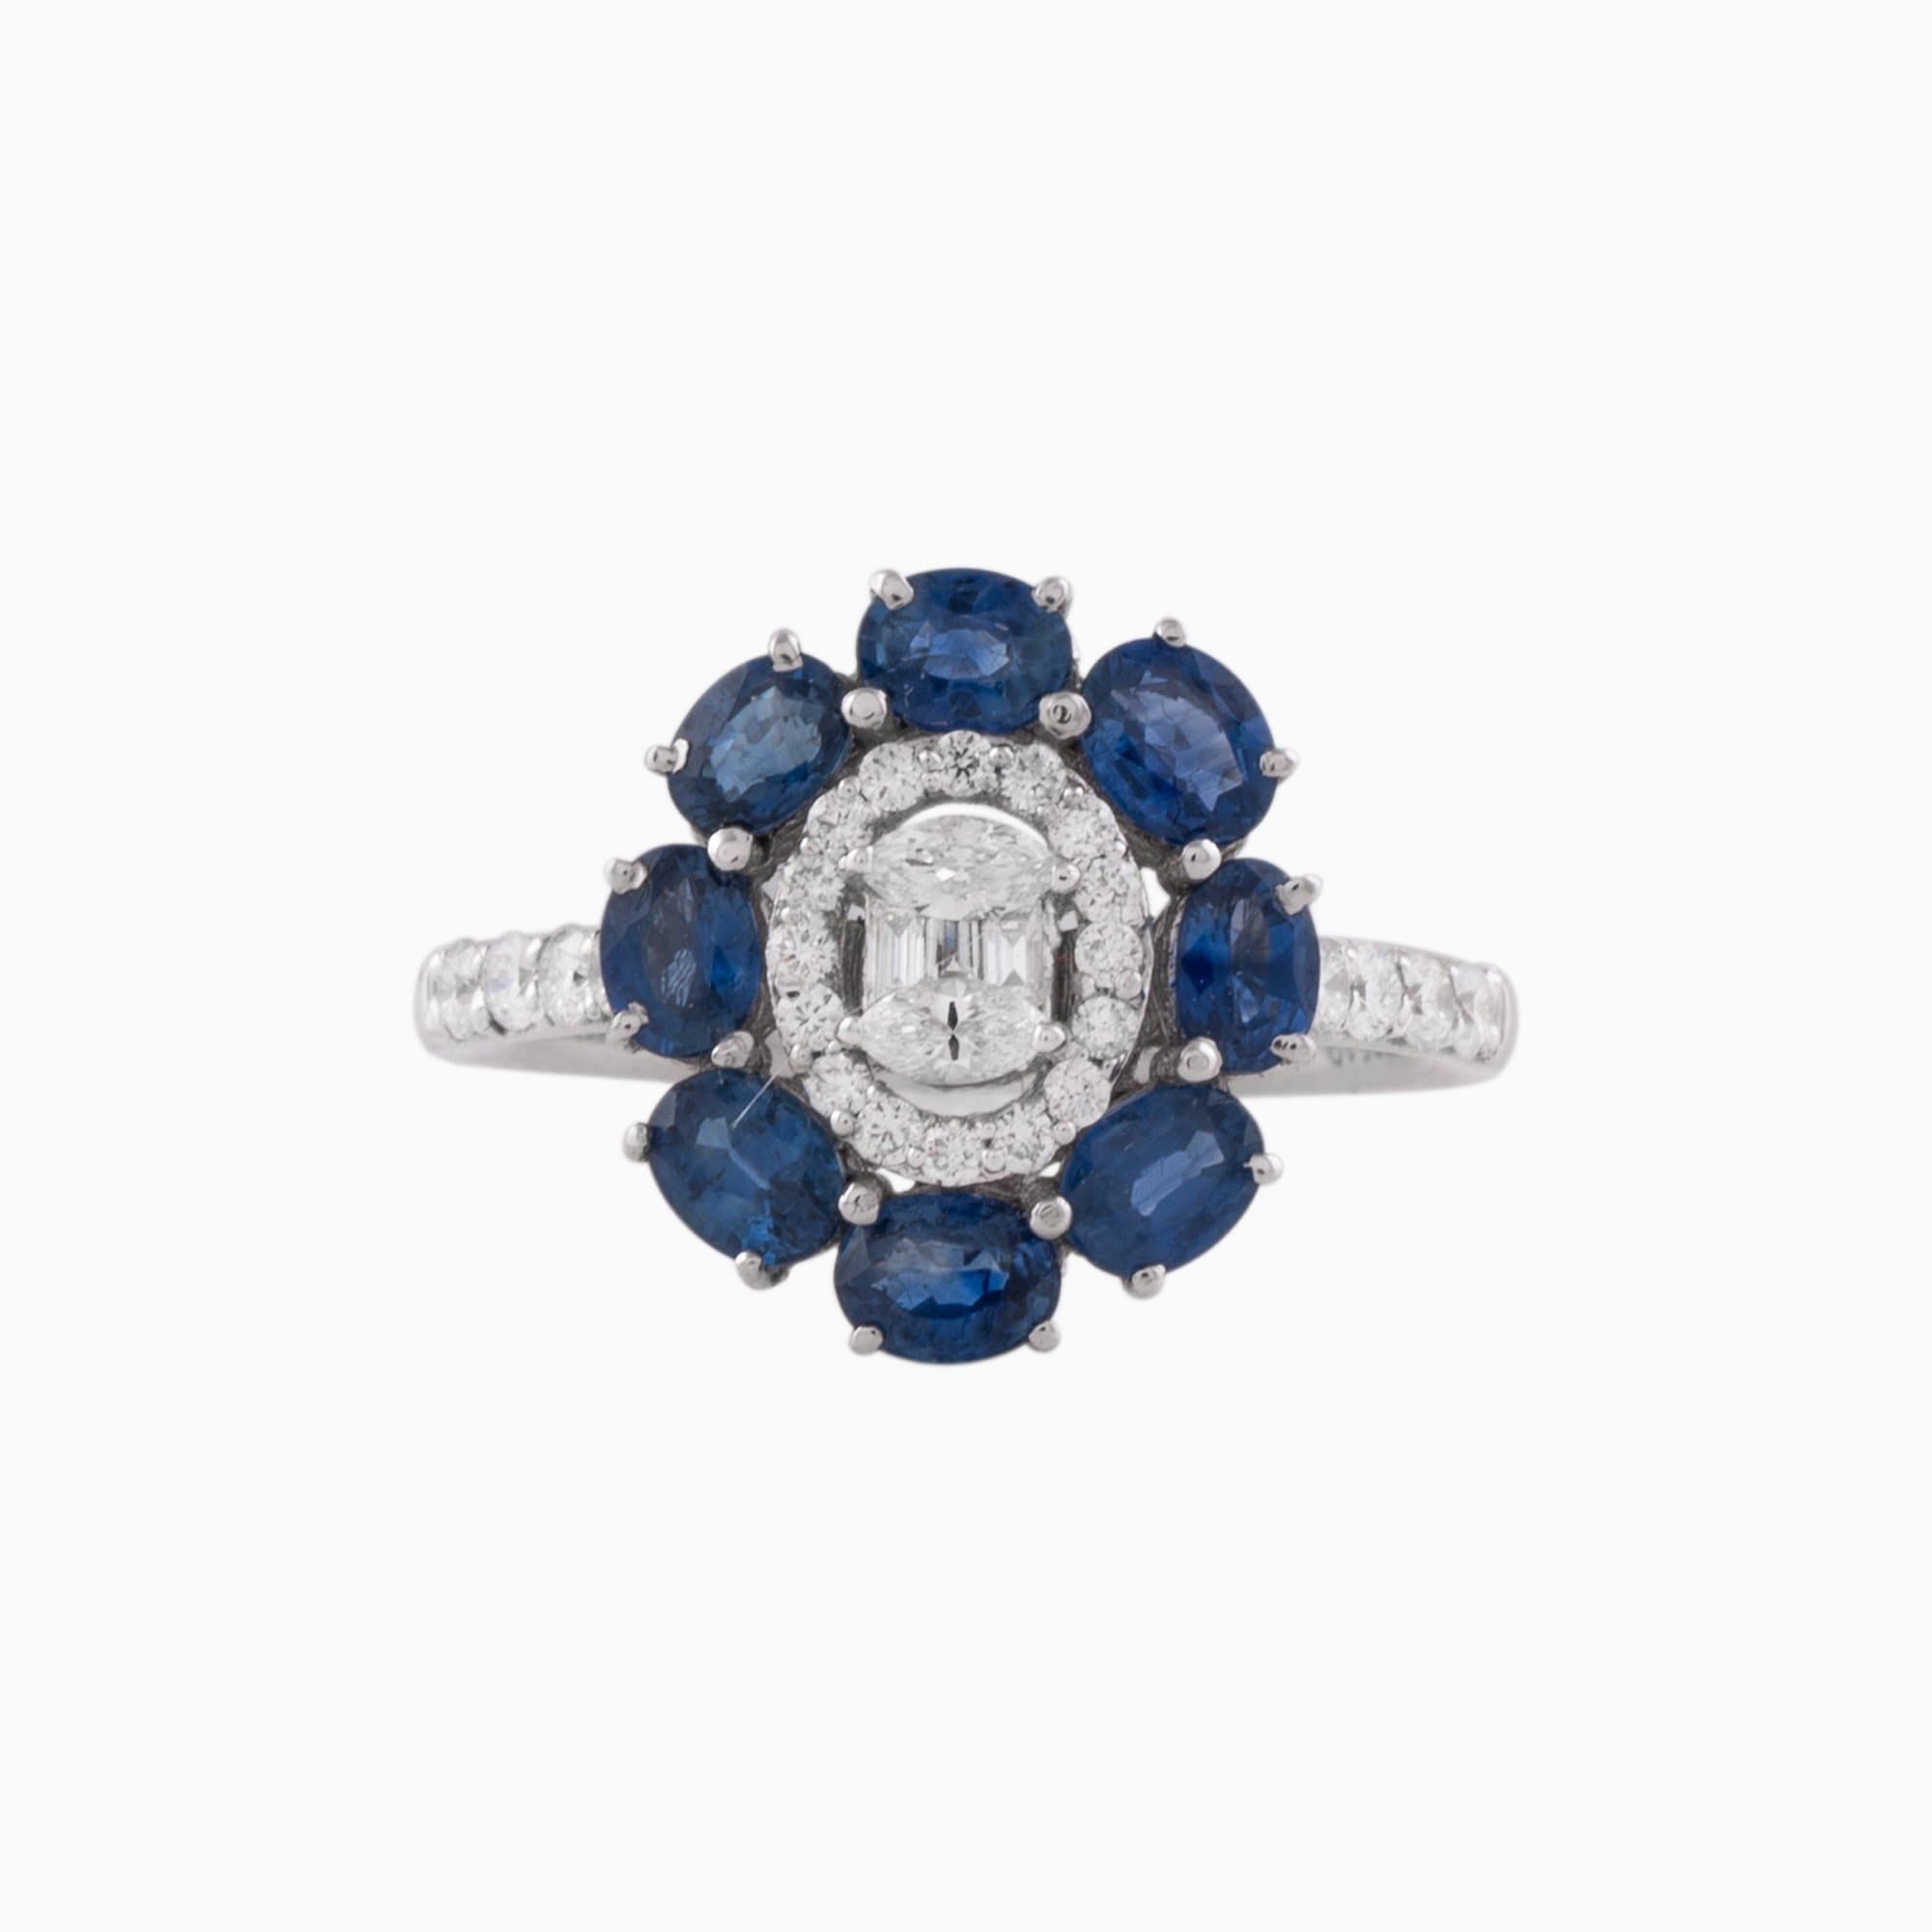 Ring with Round cut Diamond and Blue Sapphire c/st - PGDR0230